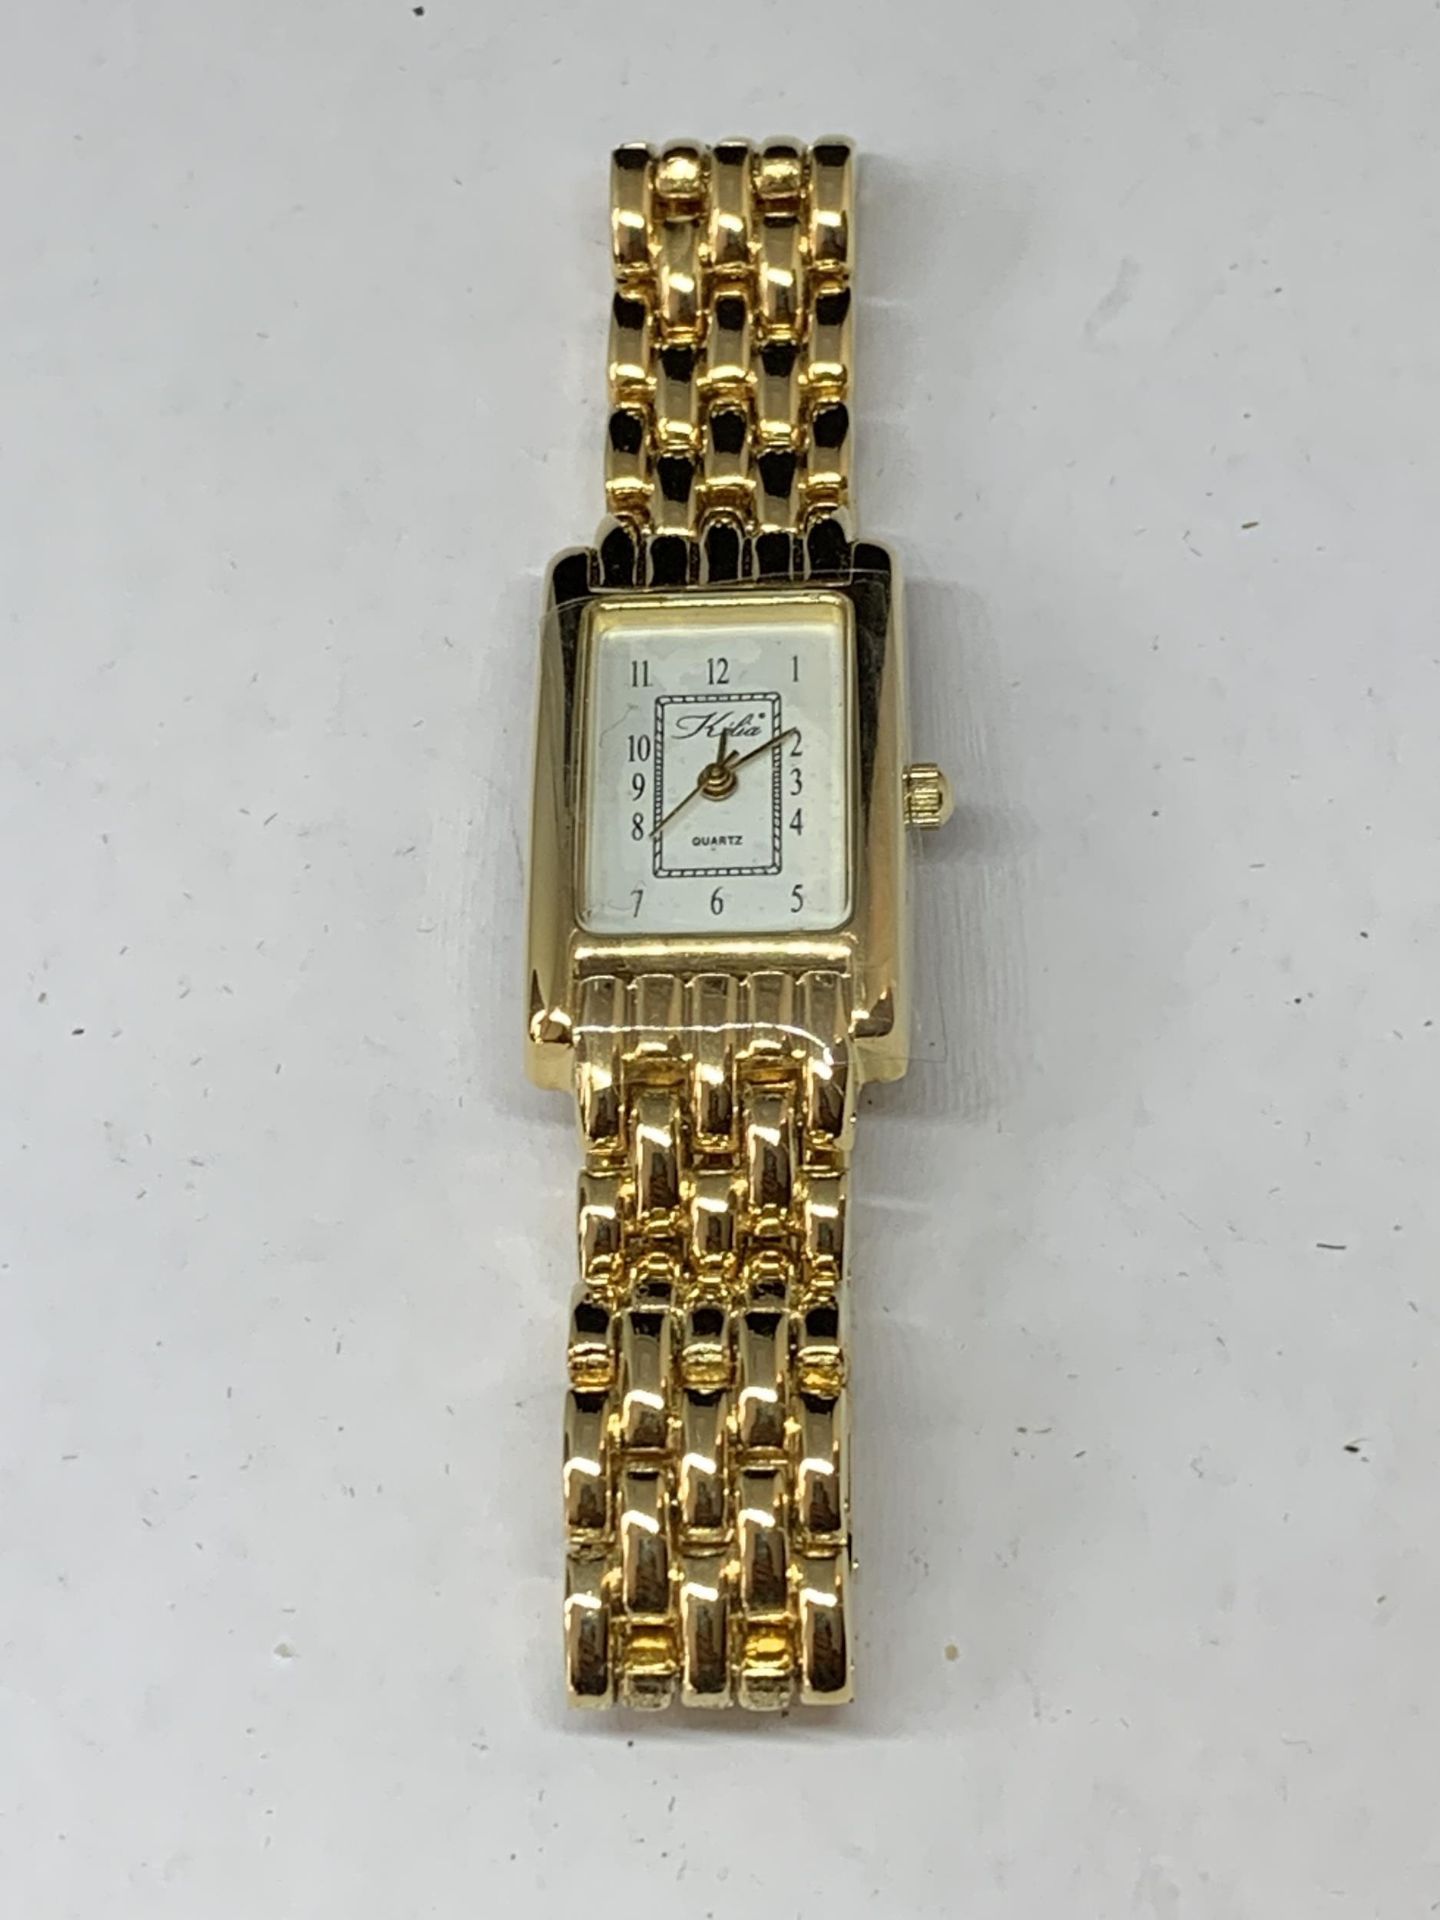 A YELLOW METAL WRIST WATCH WITH RECTANGULAR FACE SEEN WORKING BUT NO WARRANTY